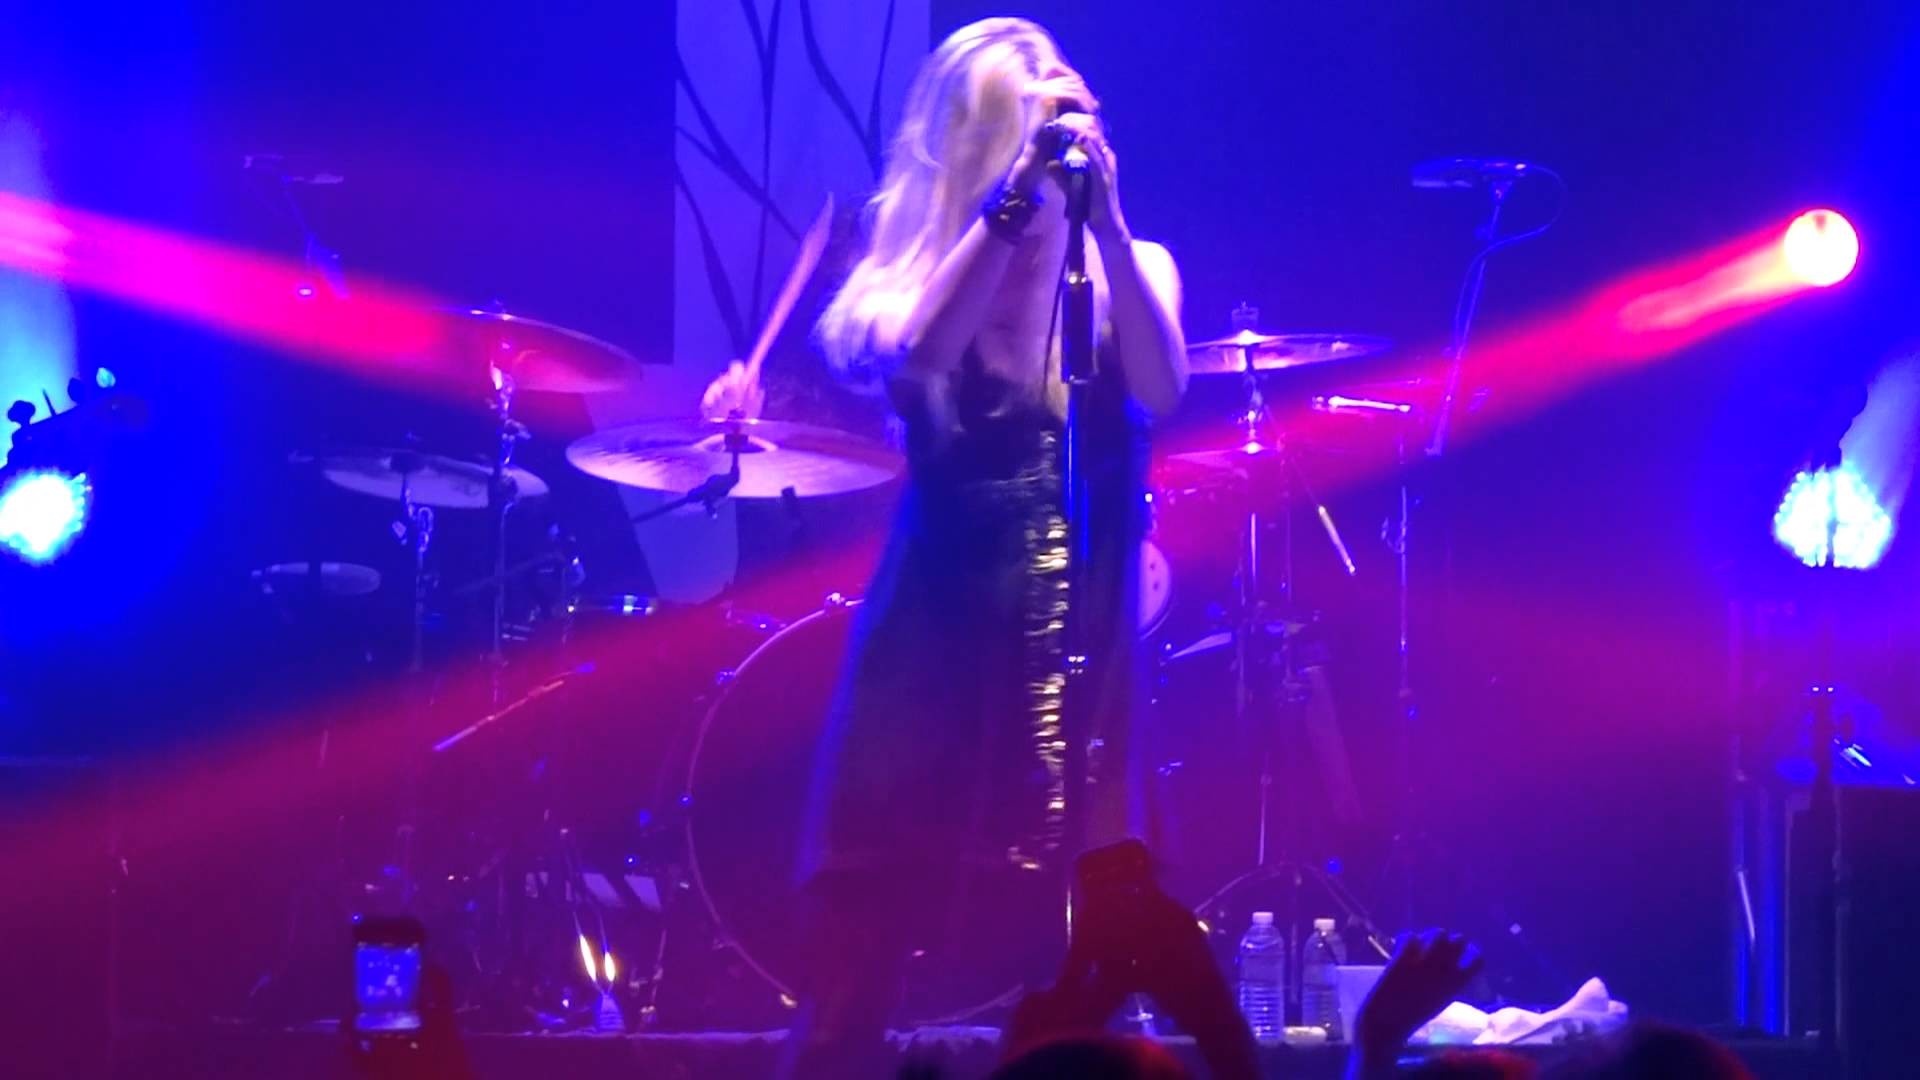 1920x1080 The Pretty Reckless - "Going to Hell" (Live in Anaheim 10-10-13)